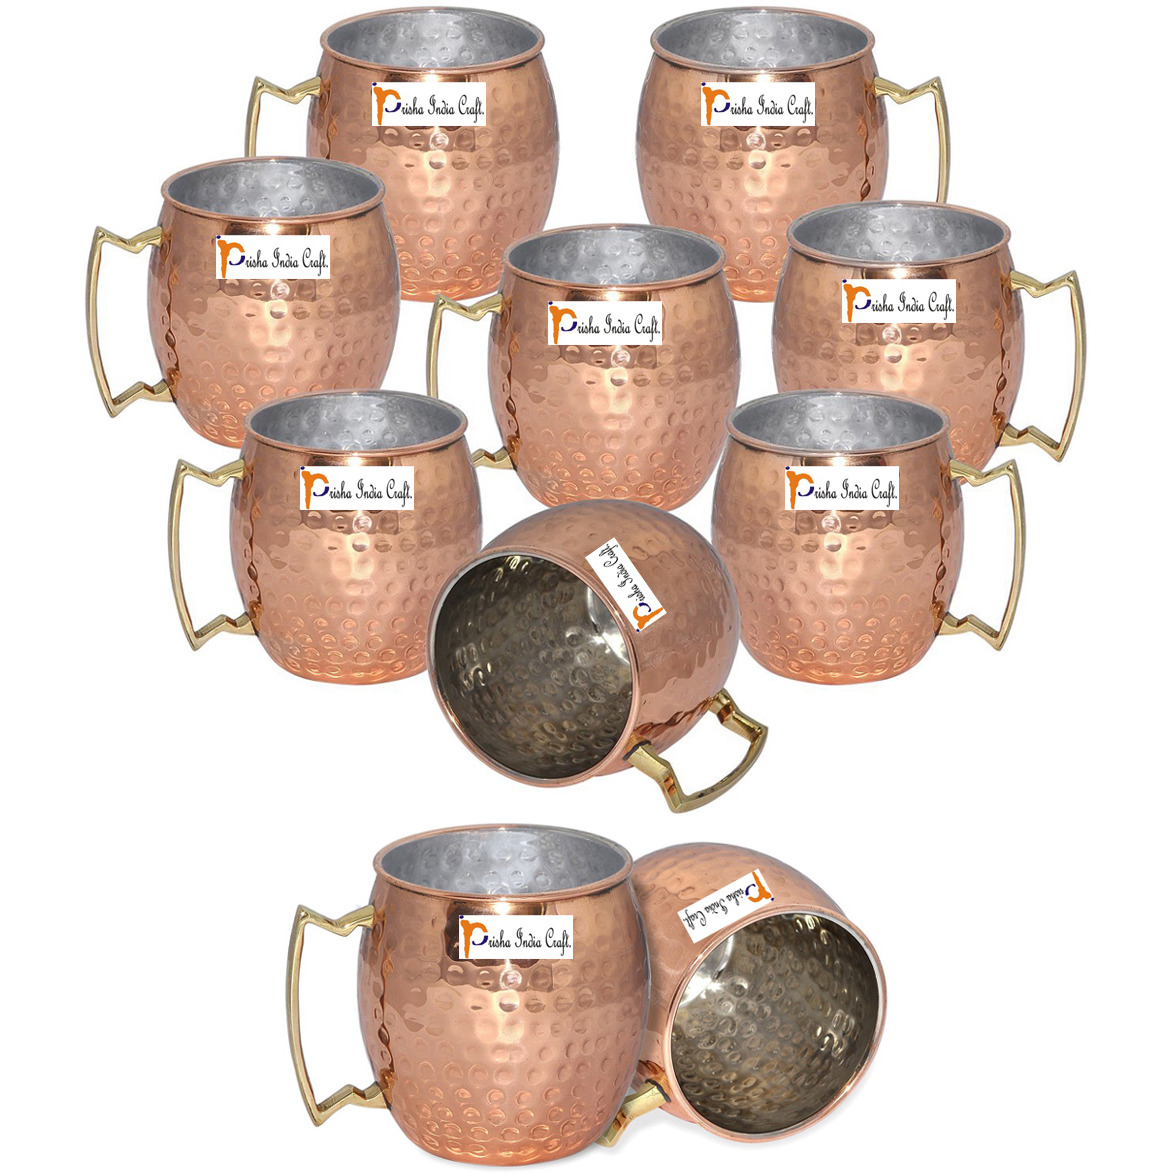 Set of 10 - Prisha India Craft B. Copper Mug for Moscow Mules 560 ML / 18 oz Inside Nickle Hammered Best Quality Lacquered Finish Mule Cup, Moscow Mule Cocktail Cup, Copper Mugs, Cocktail Mugs